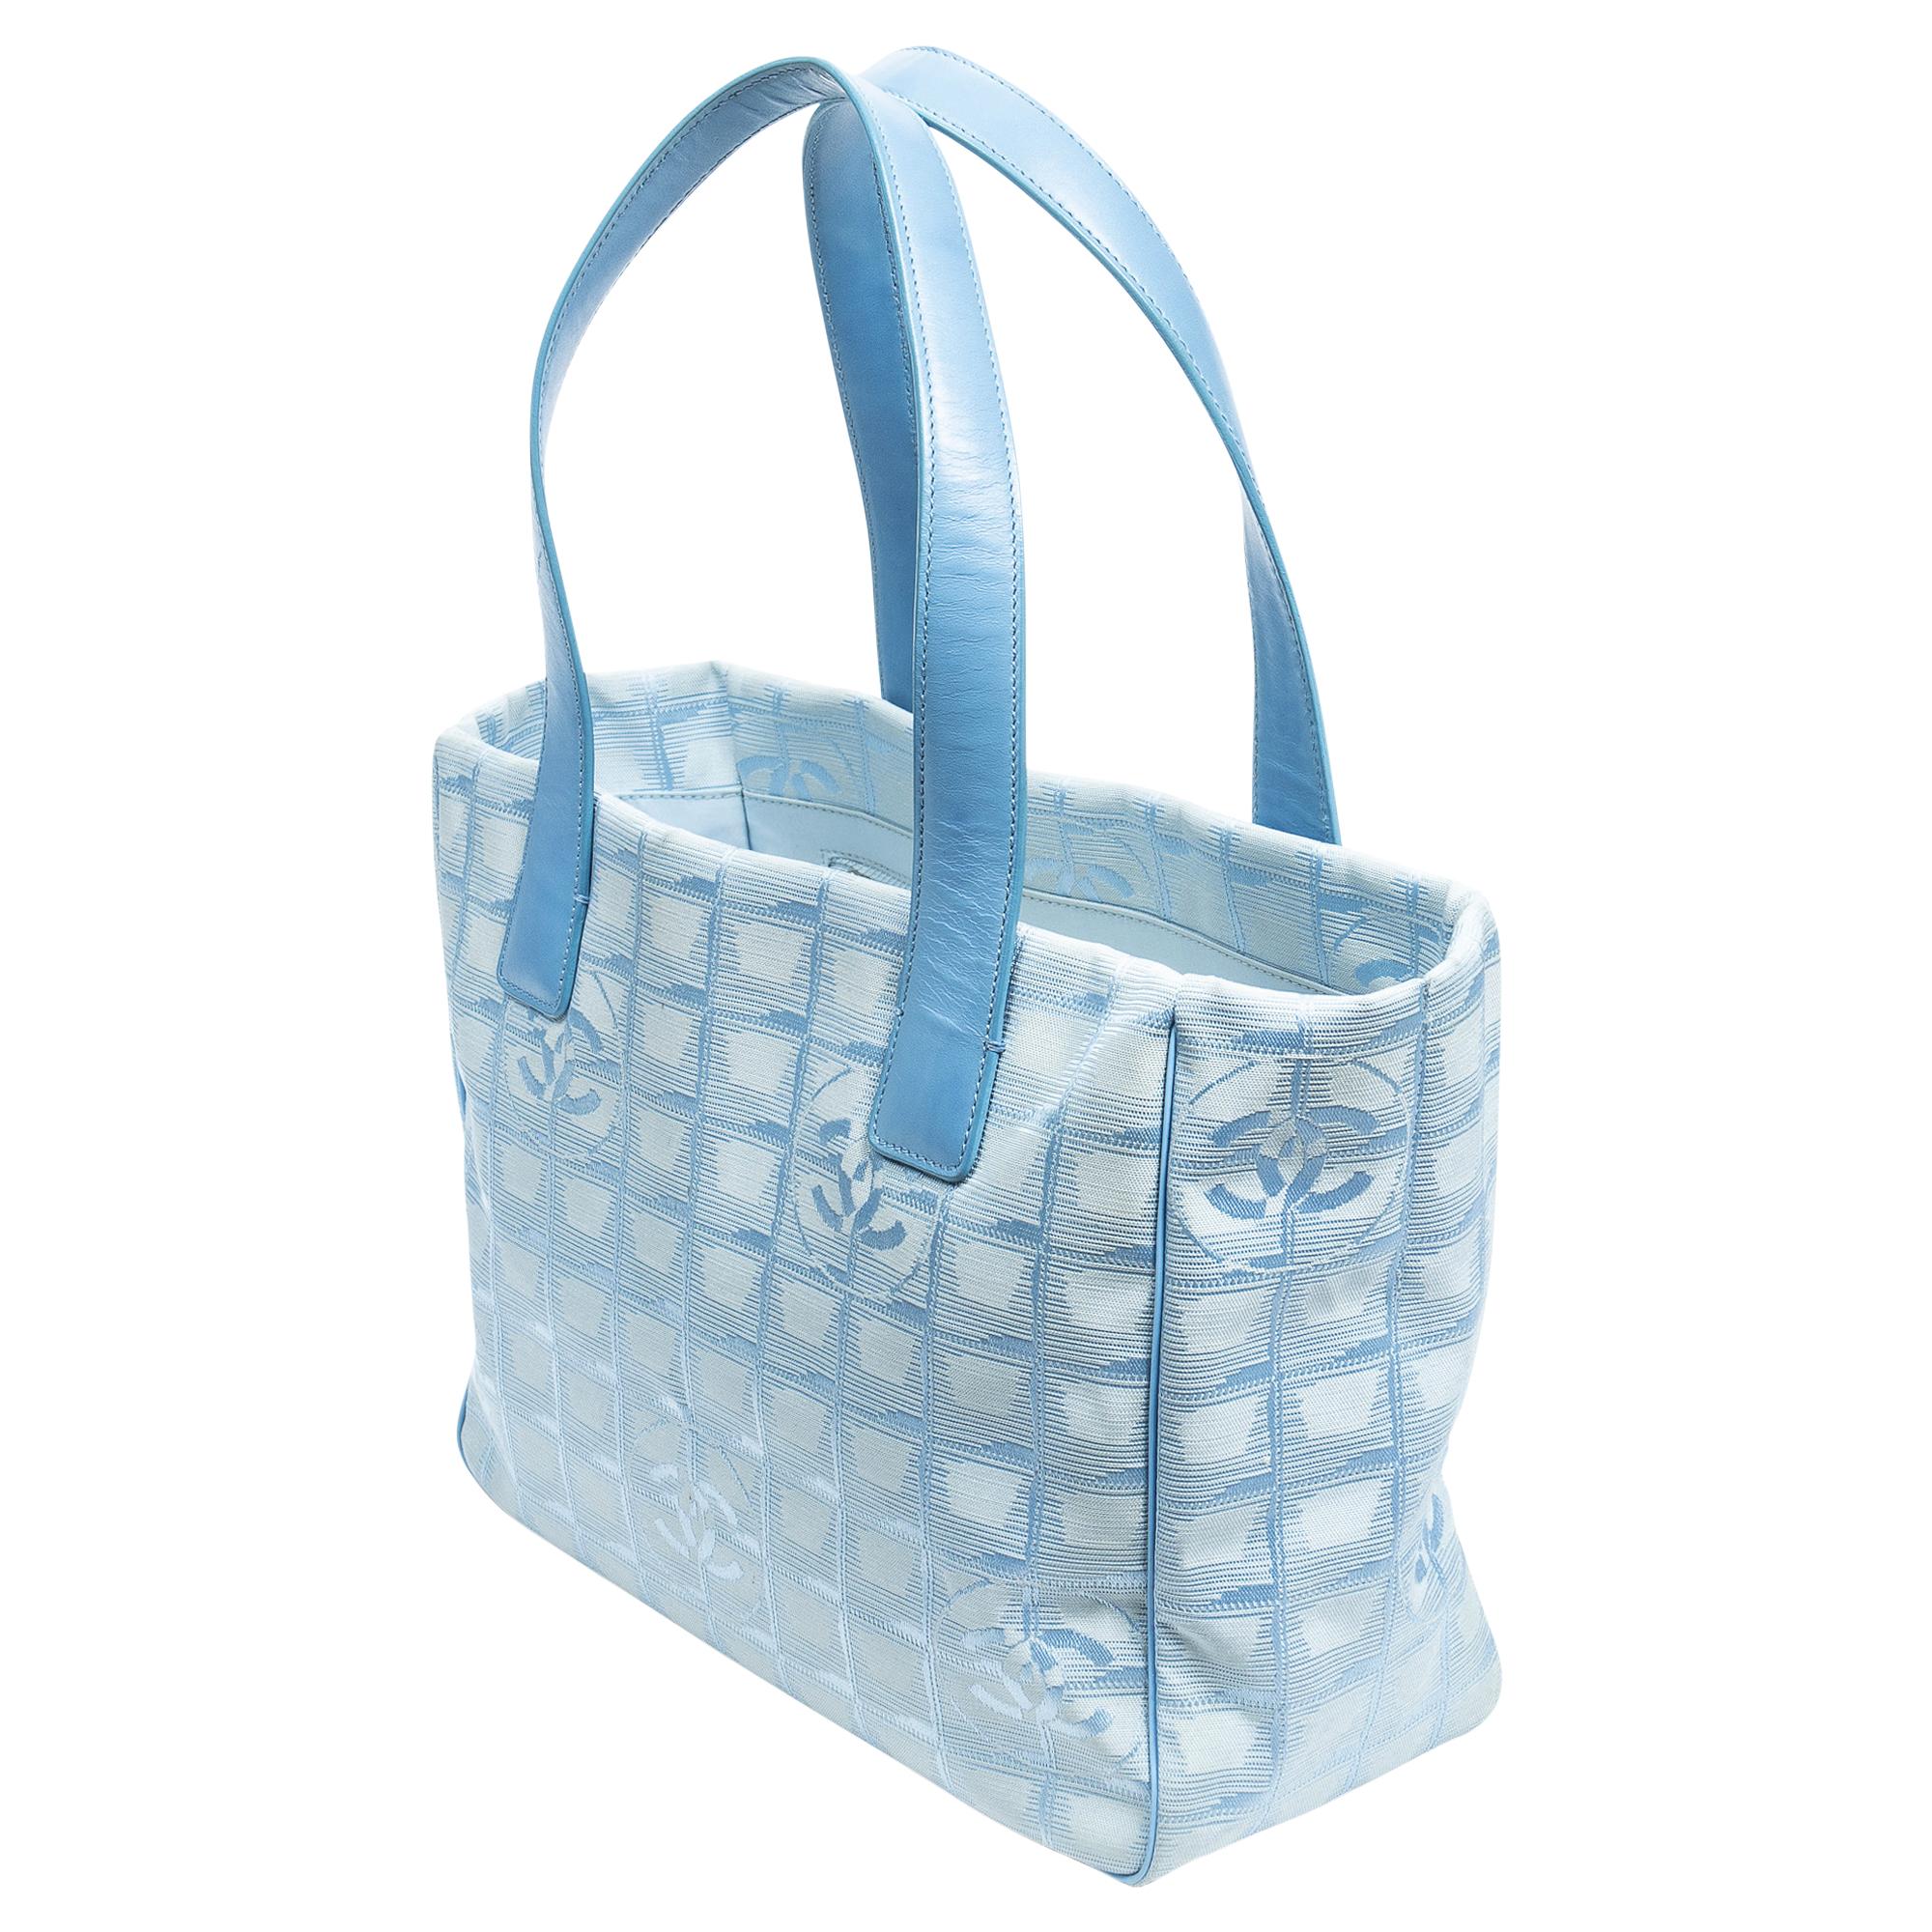 Dive into sophistication with the Chanel 2002 Blue Travel Ligne Shopping Tote. Crafted from durable canvas in a serene blue hue, it's a stylish companion for everyday adventures. Enhanced with silver hardware and a practical zipper closure, its